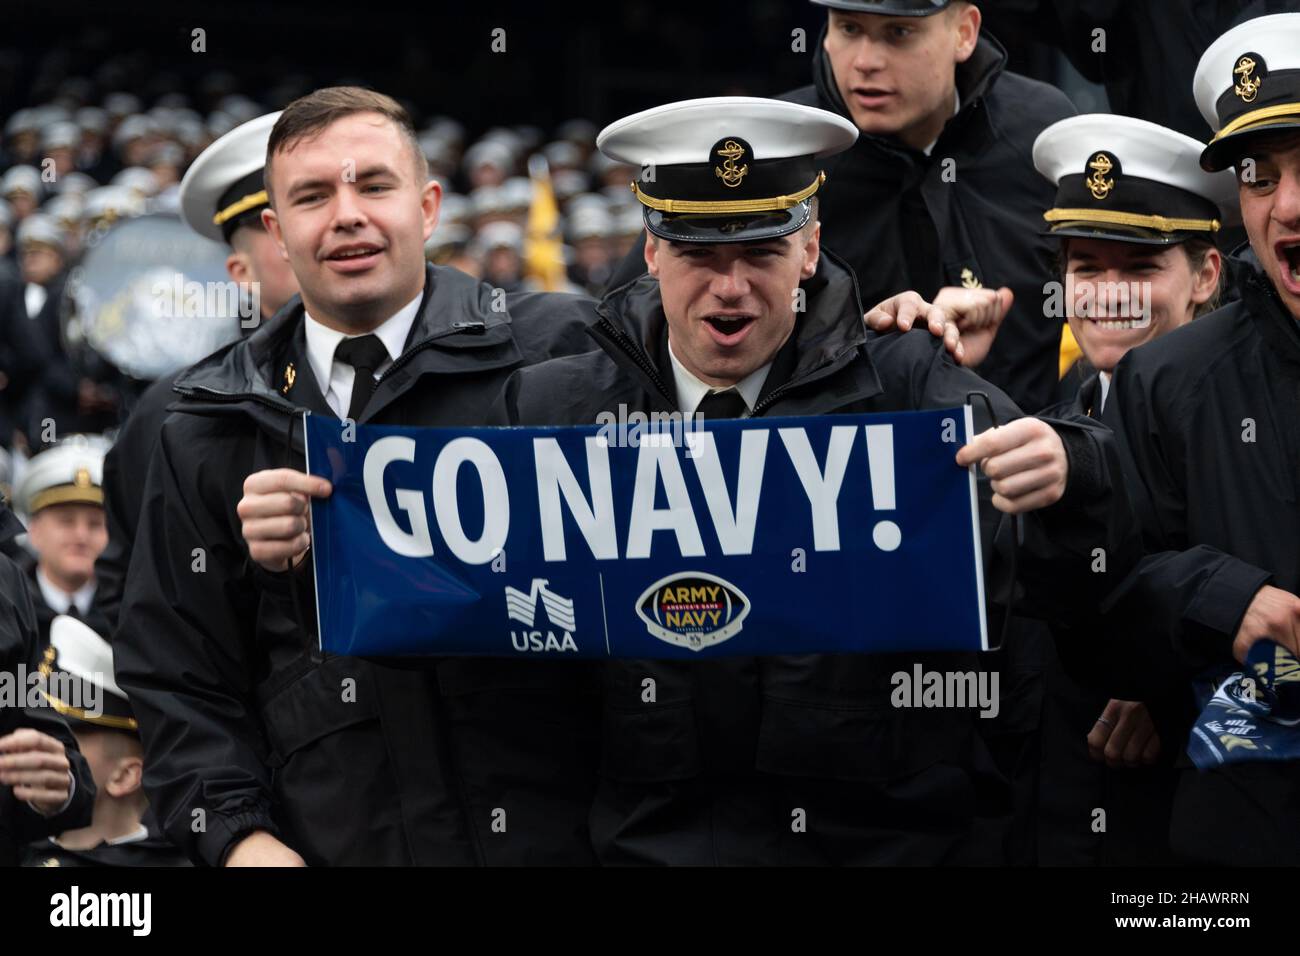 East Rutherford, United States of America. 11 December, 2021. The U.S. Naval Academy midshipman cheering during the annual Army-Navy football game at Metlife Stadium December 11, 2021 in East Rutherford, New Jersey. The U.S. Naval Academy Midshipmen defeated the Army Black Knights 17-13 in their 122nd matchup.  Credit: Stacy Godfrey/DOD/Alamy Live News Stock Photo